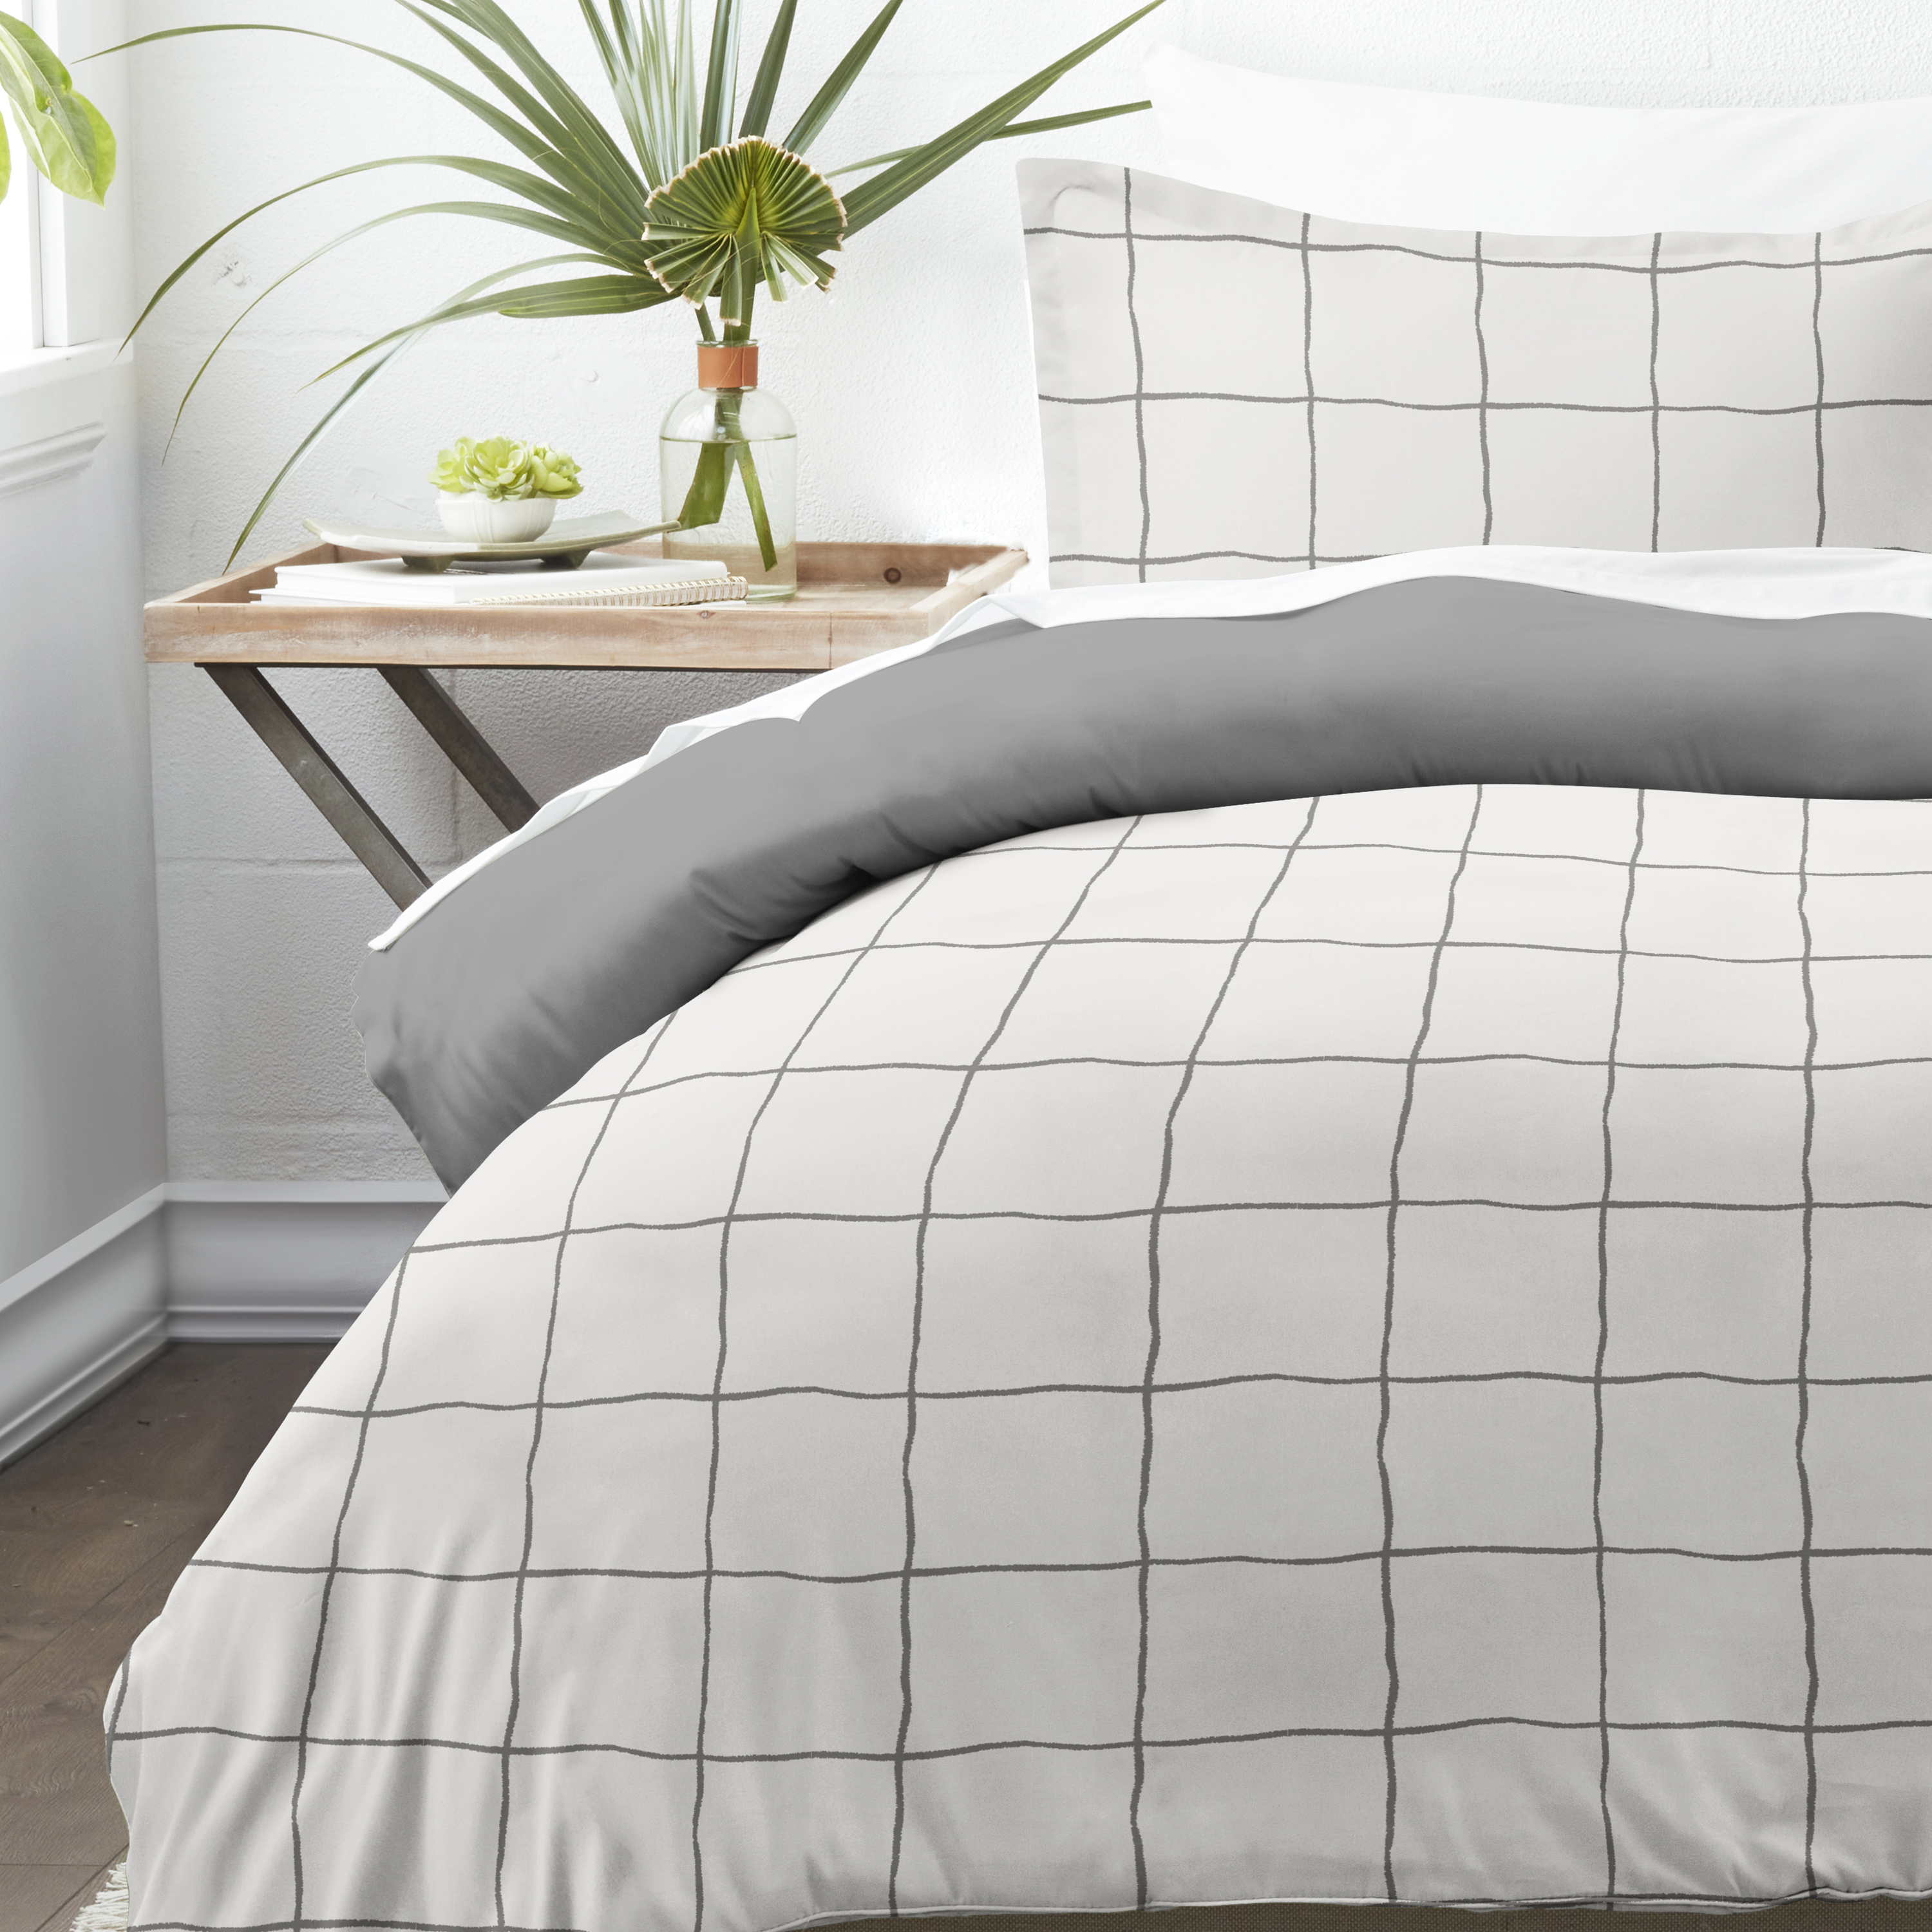 Made Supply Co. 2 Piece Hypoallergenic Oversized Grid Print Comforter Set with Shams, Twin/Twin XL - image 2 of 4